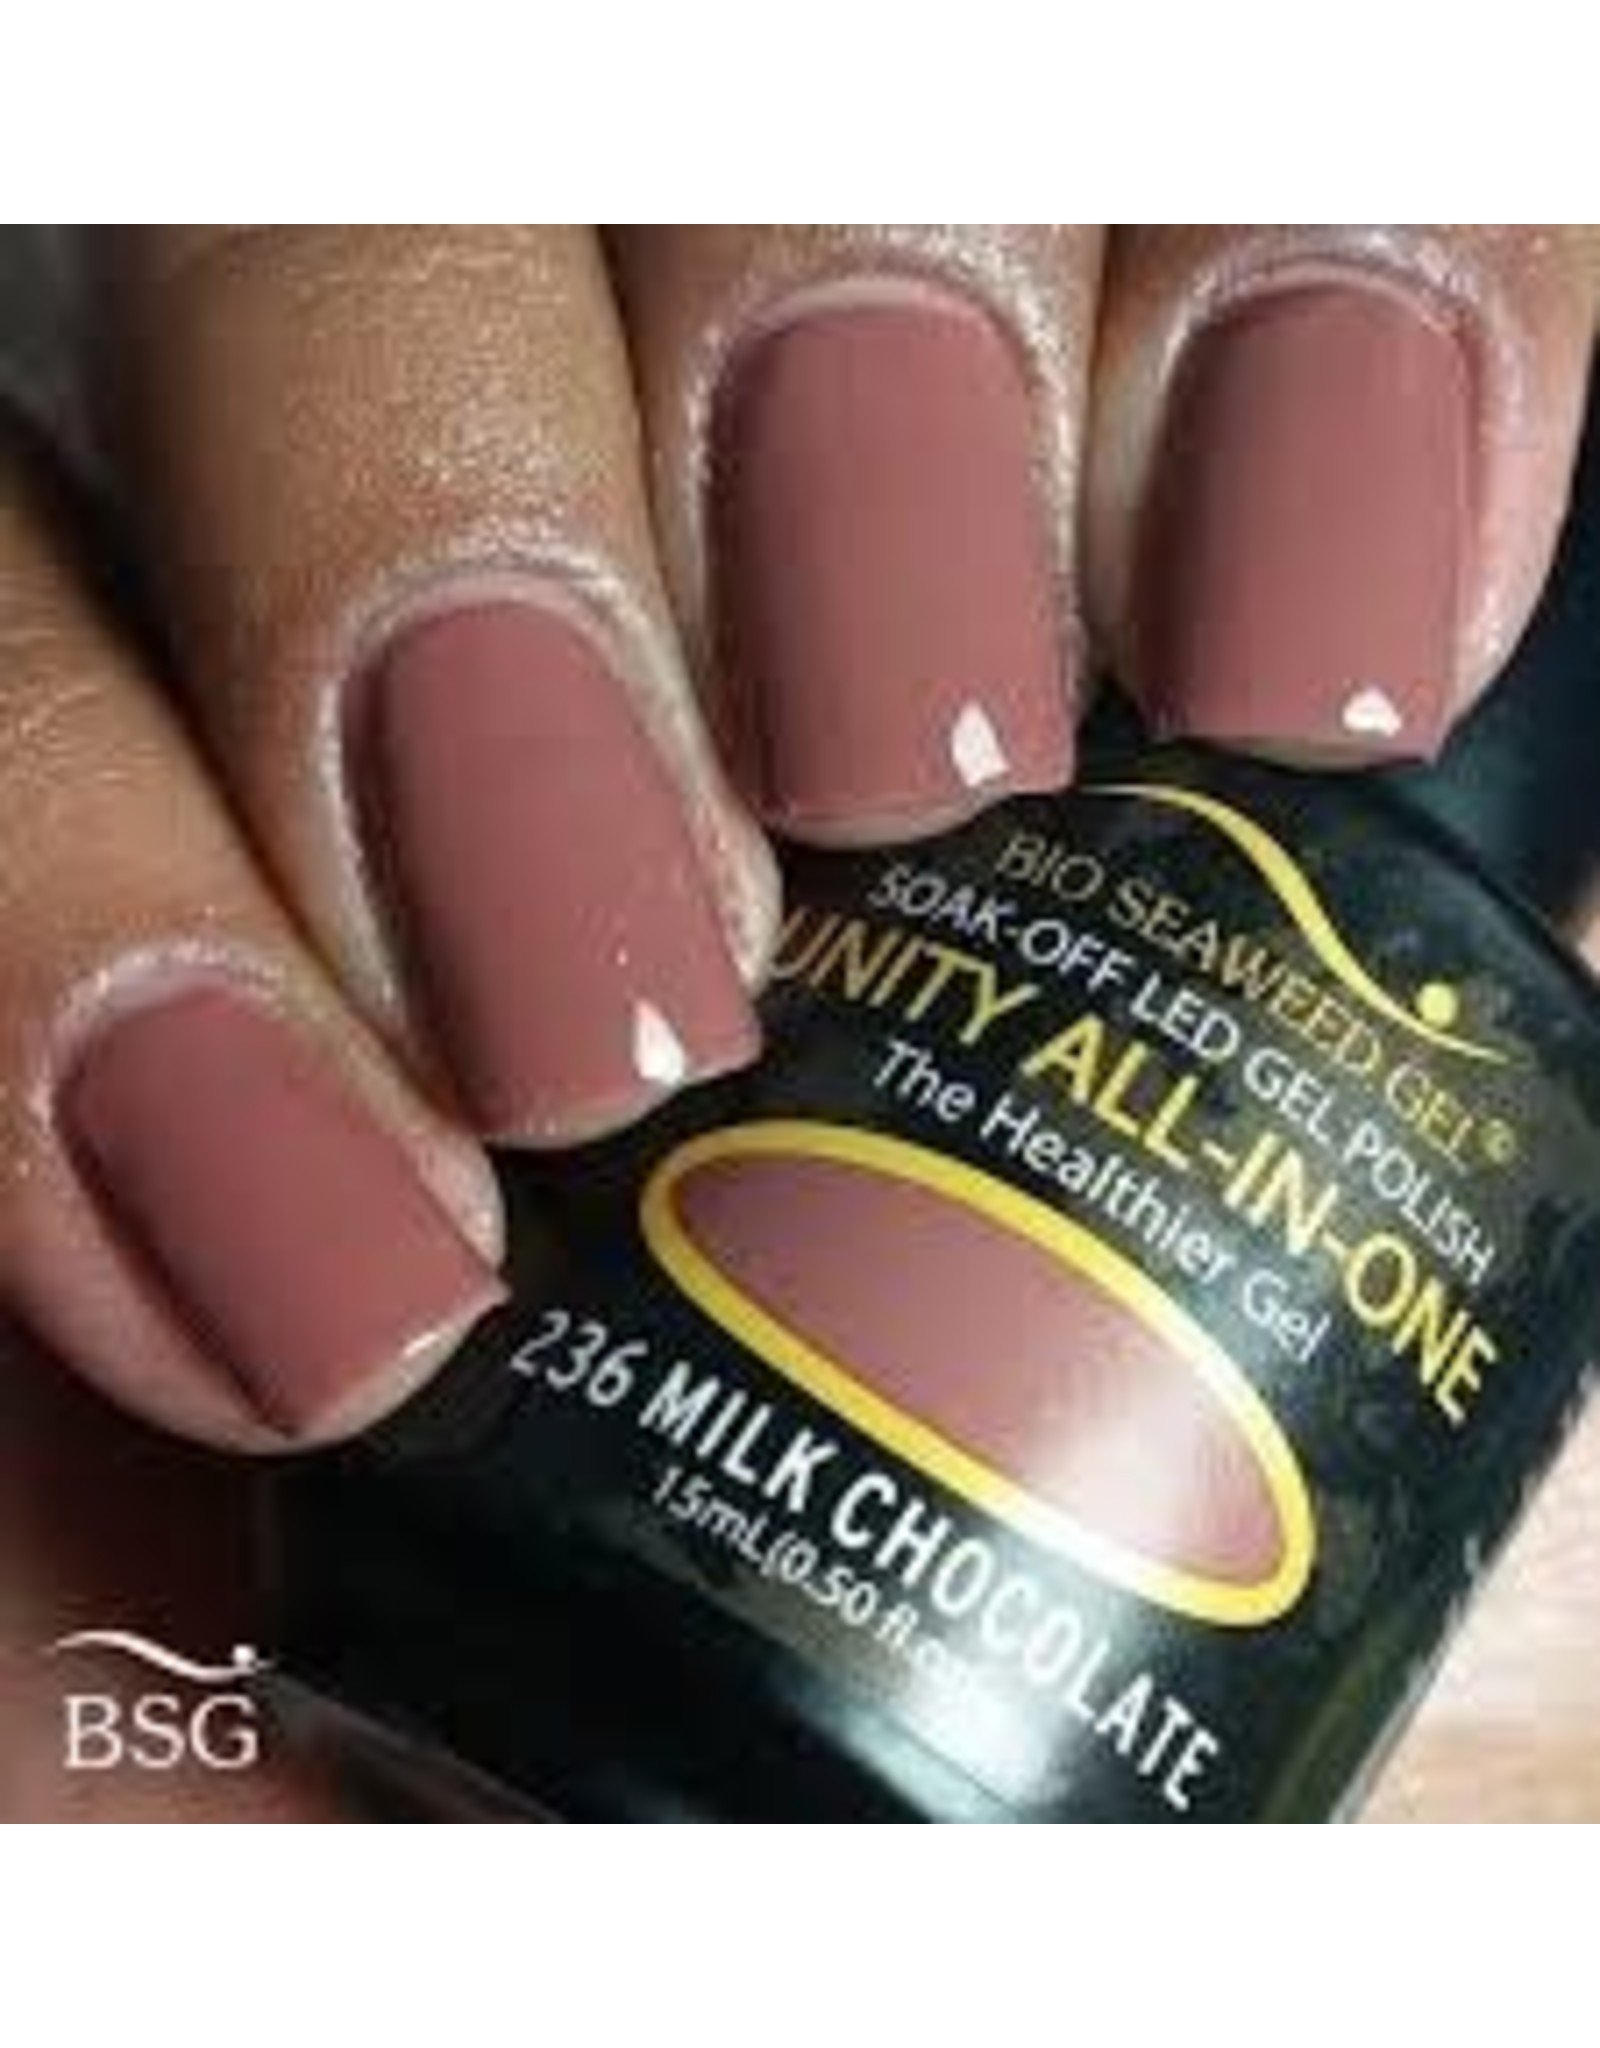 Divine Solstice Nail Boutique - Products used: TNN Gel Polish in